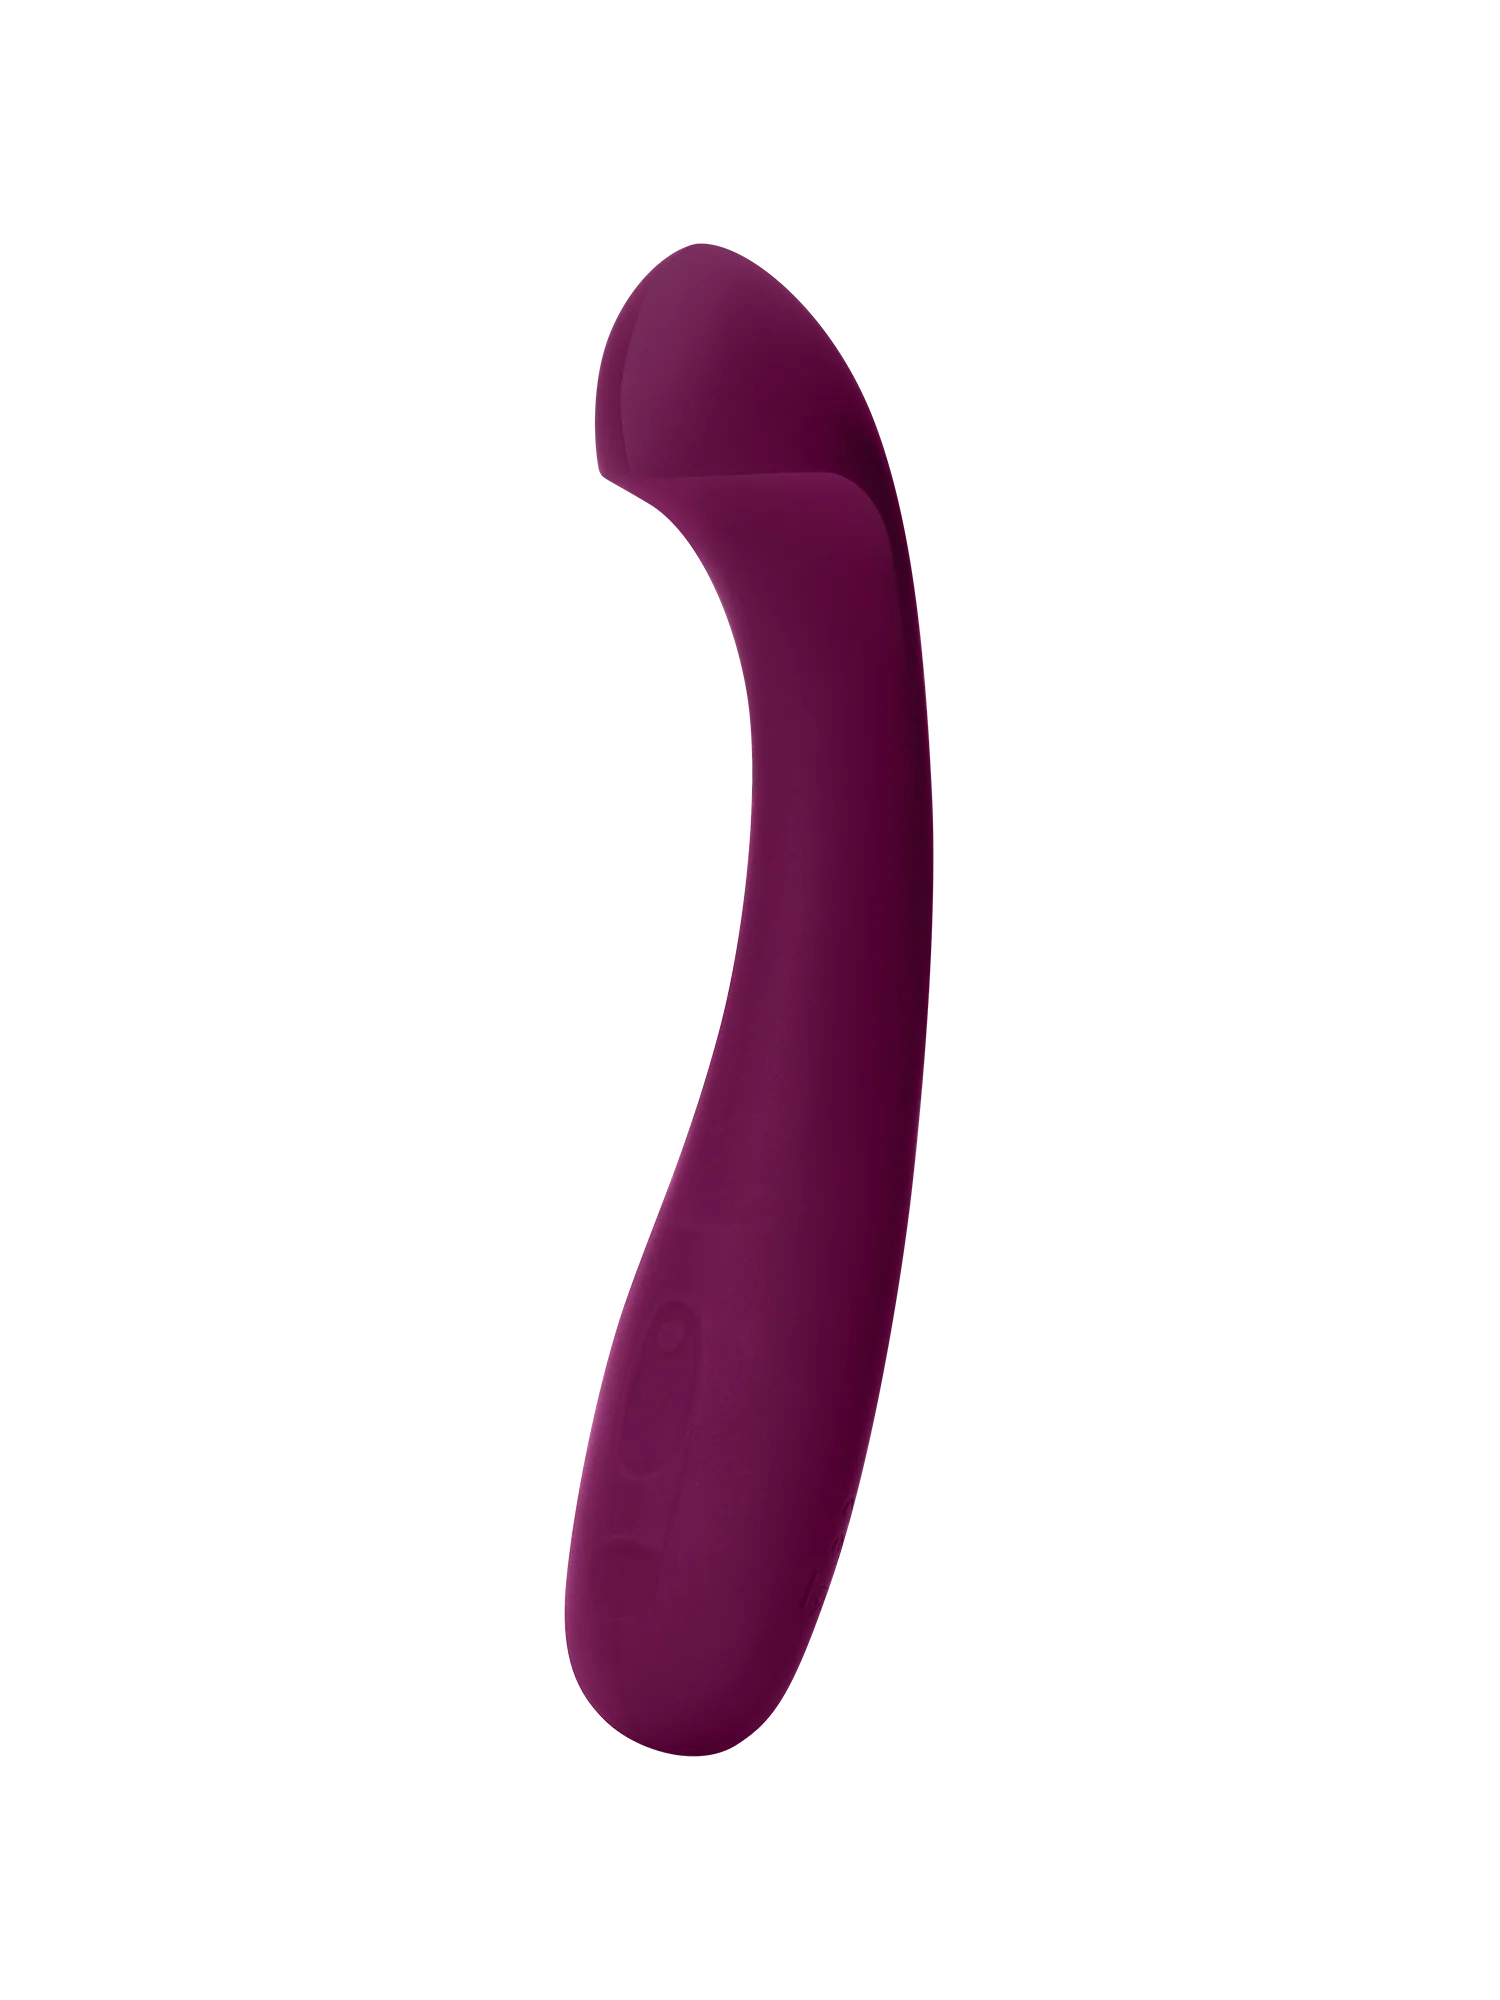 dame arc vibrator, the best dame sex toy for g-spot stimulation